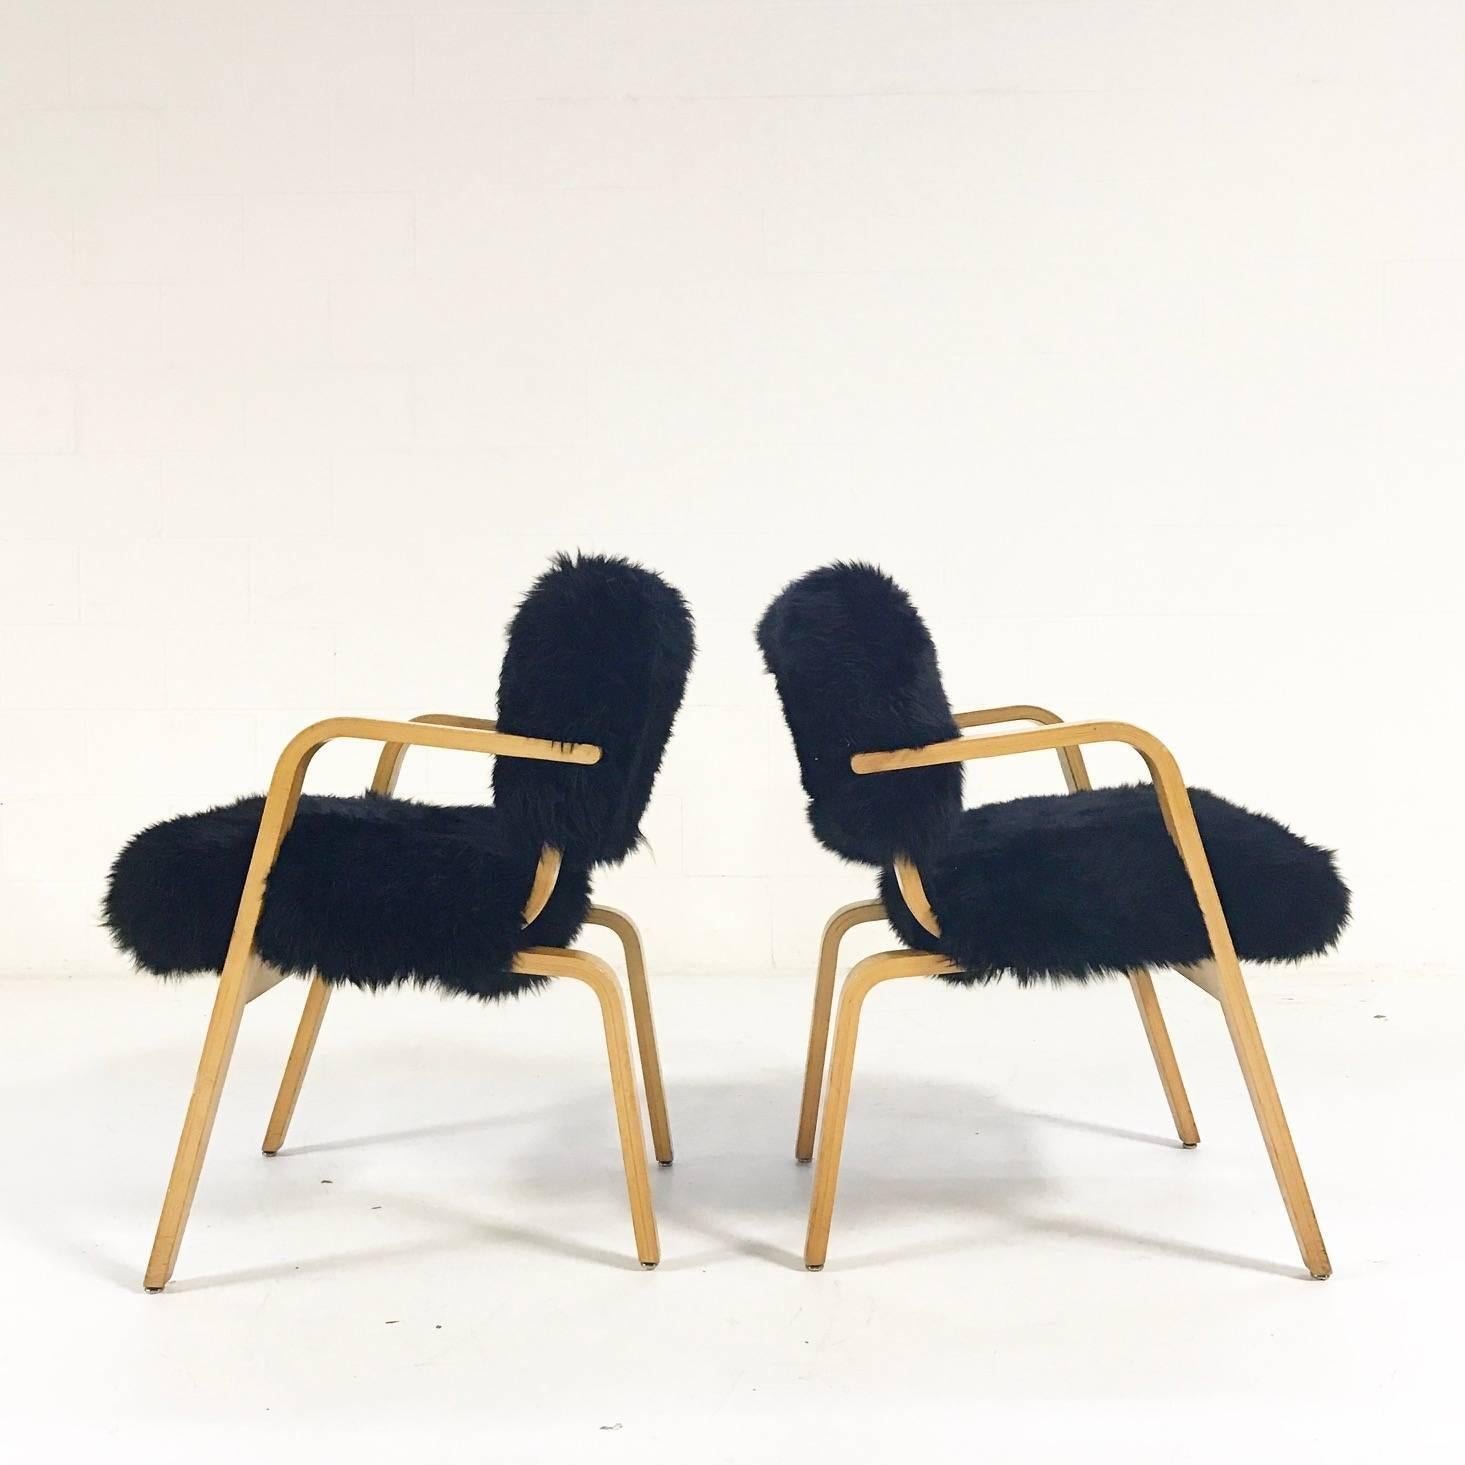 How cool are these! This Thonet pair has the best lines. Check out that side profile. The top curve of the back legs match the curve of the arms. Love, love, lovey dove. Our designers chose our luxurious Argentinian sheepskin in black to set it